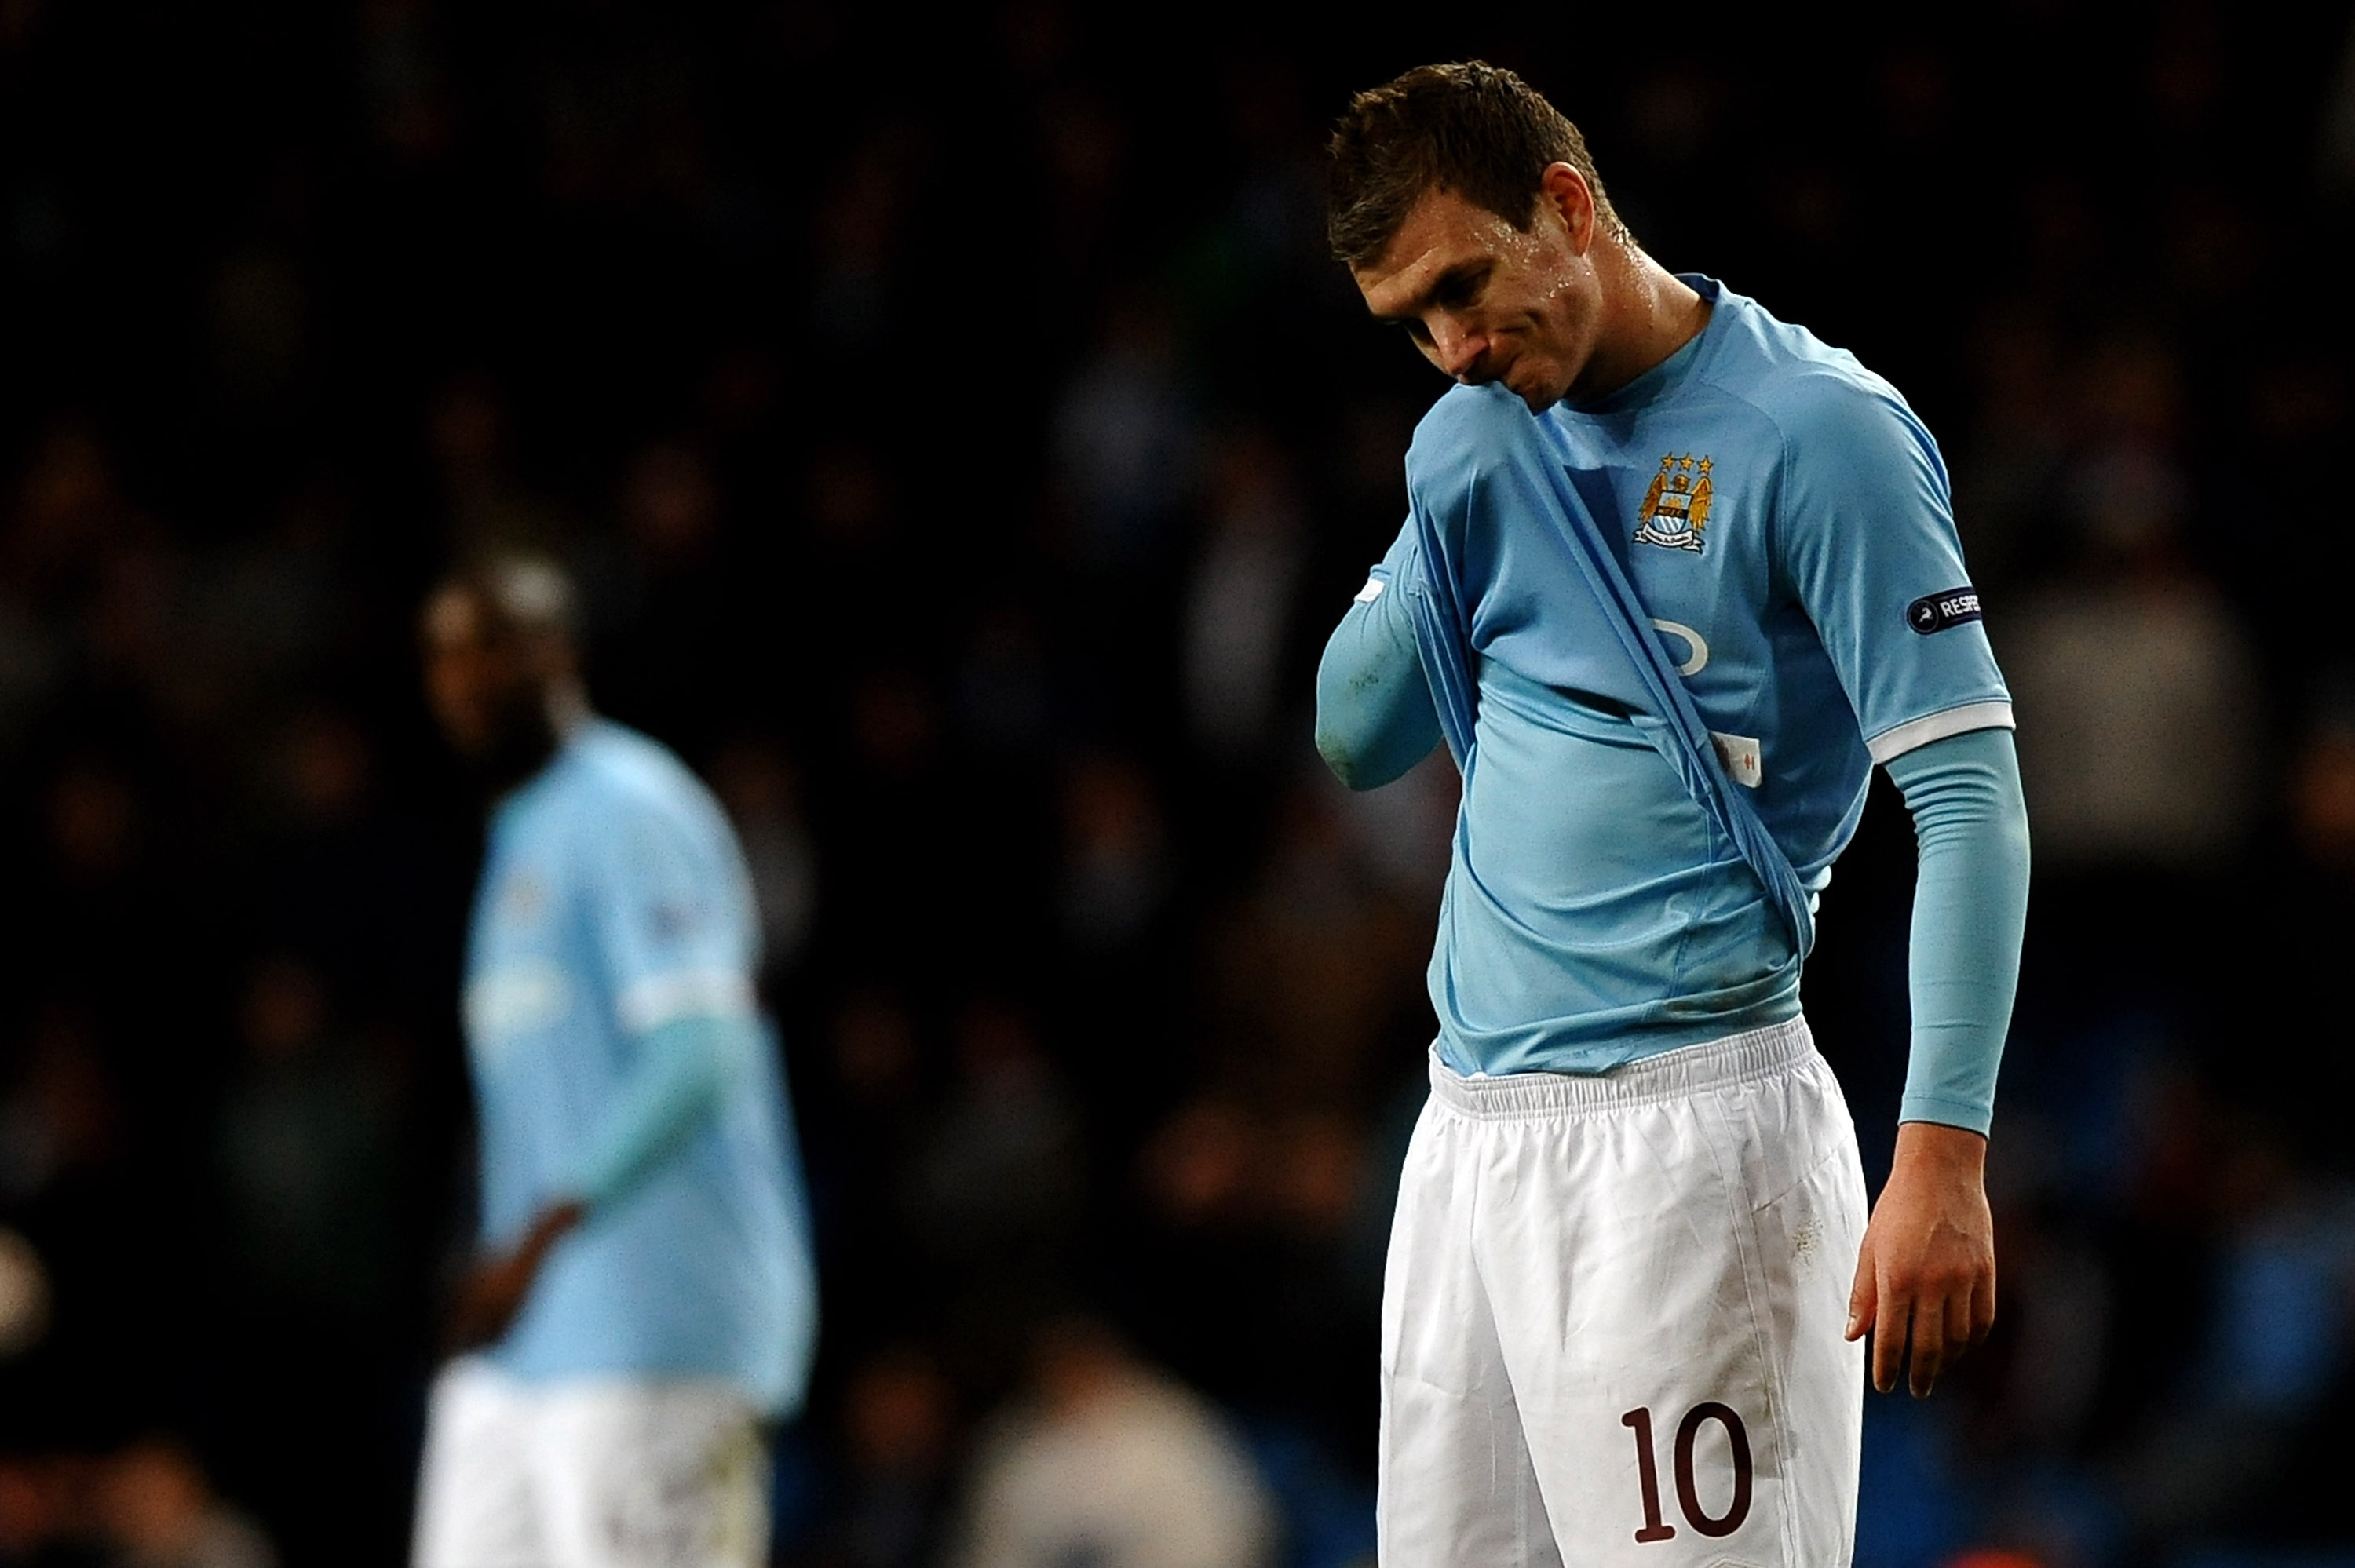 MANCHESTER, ENGLAND - MARCH 17:  Edin Dzeko of Manchester City shows his dejection during the UEFA Europa League round of 16 second leg match between Manchester City and Dynamo Kiev at City of Manchester Stadium on March 17, 2011 in Manchester, England.